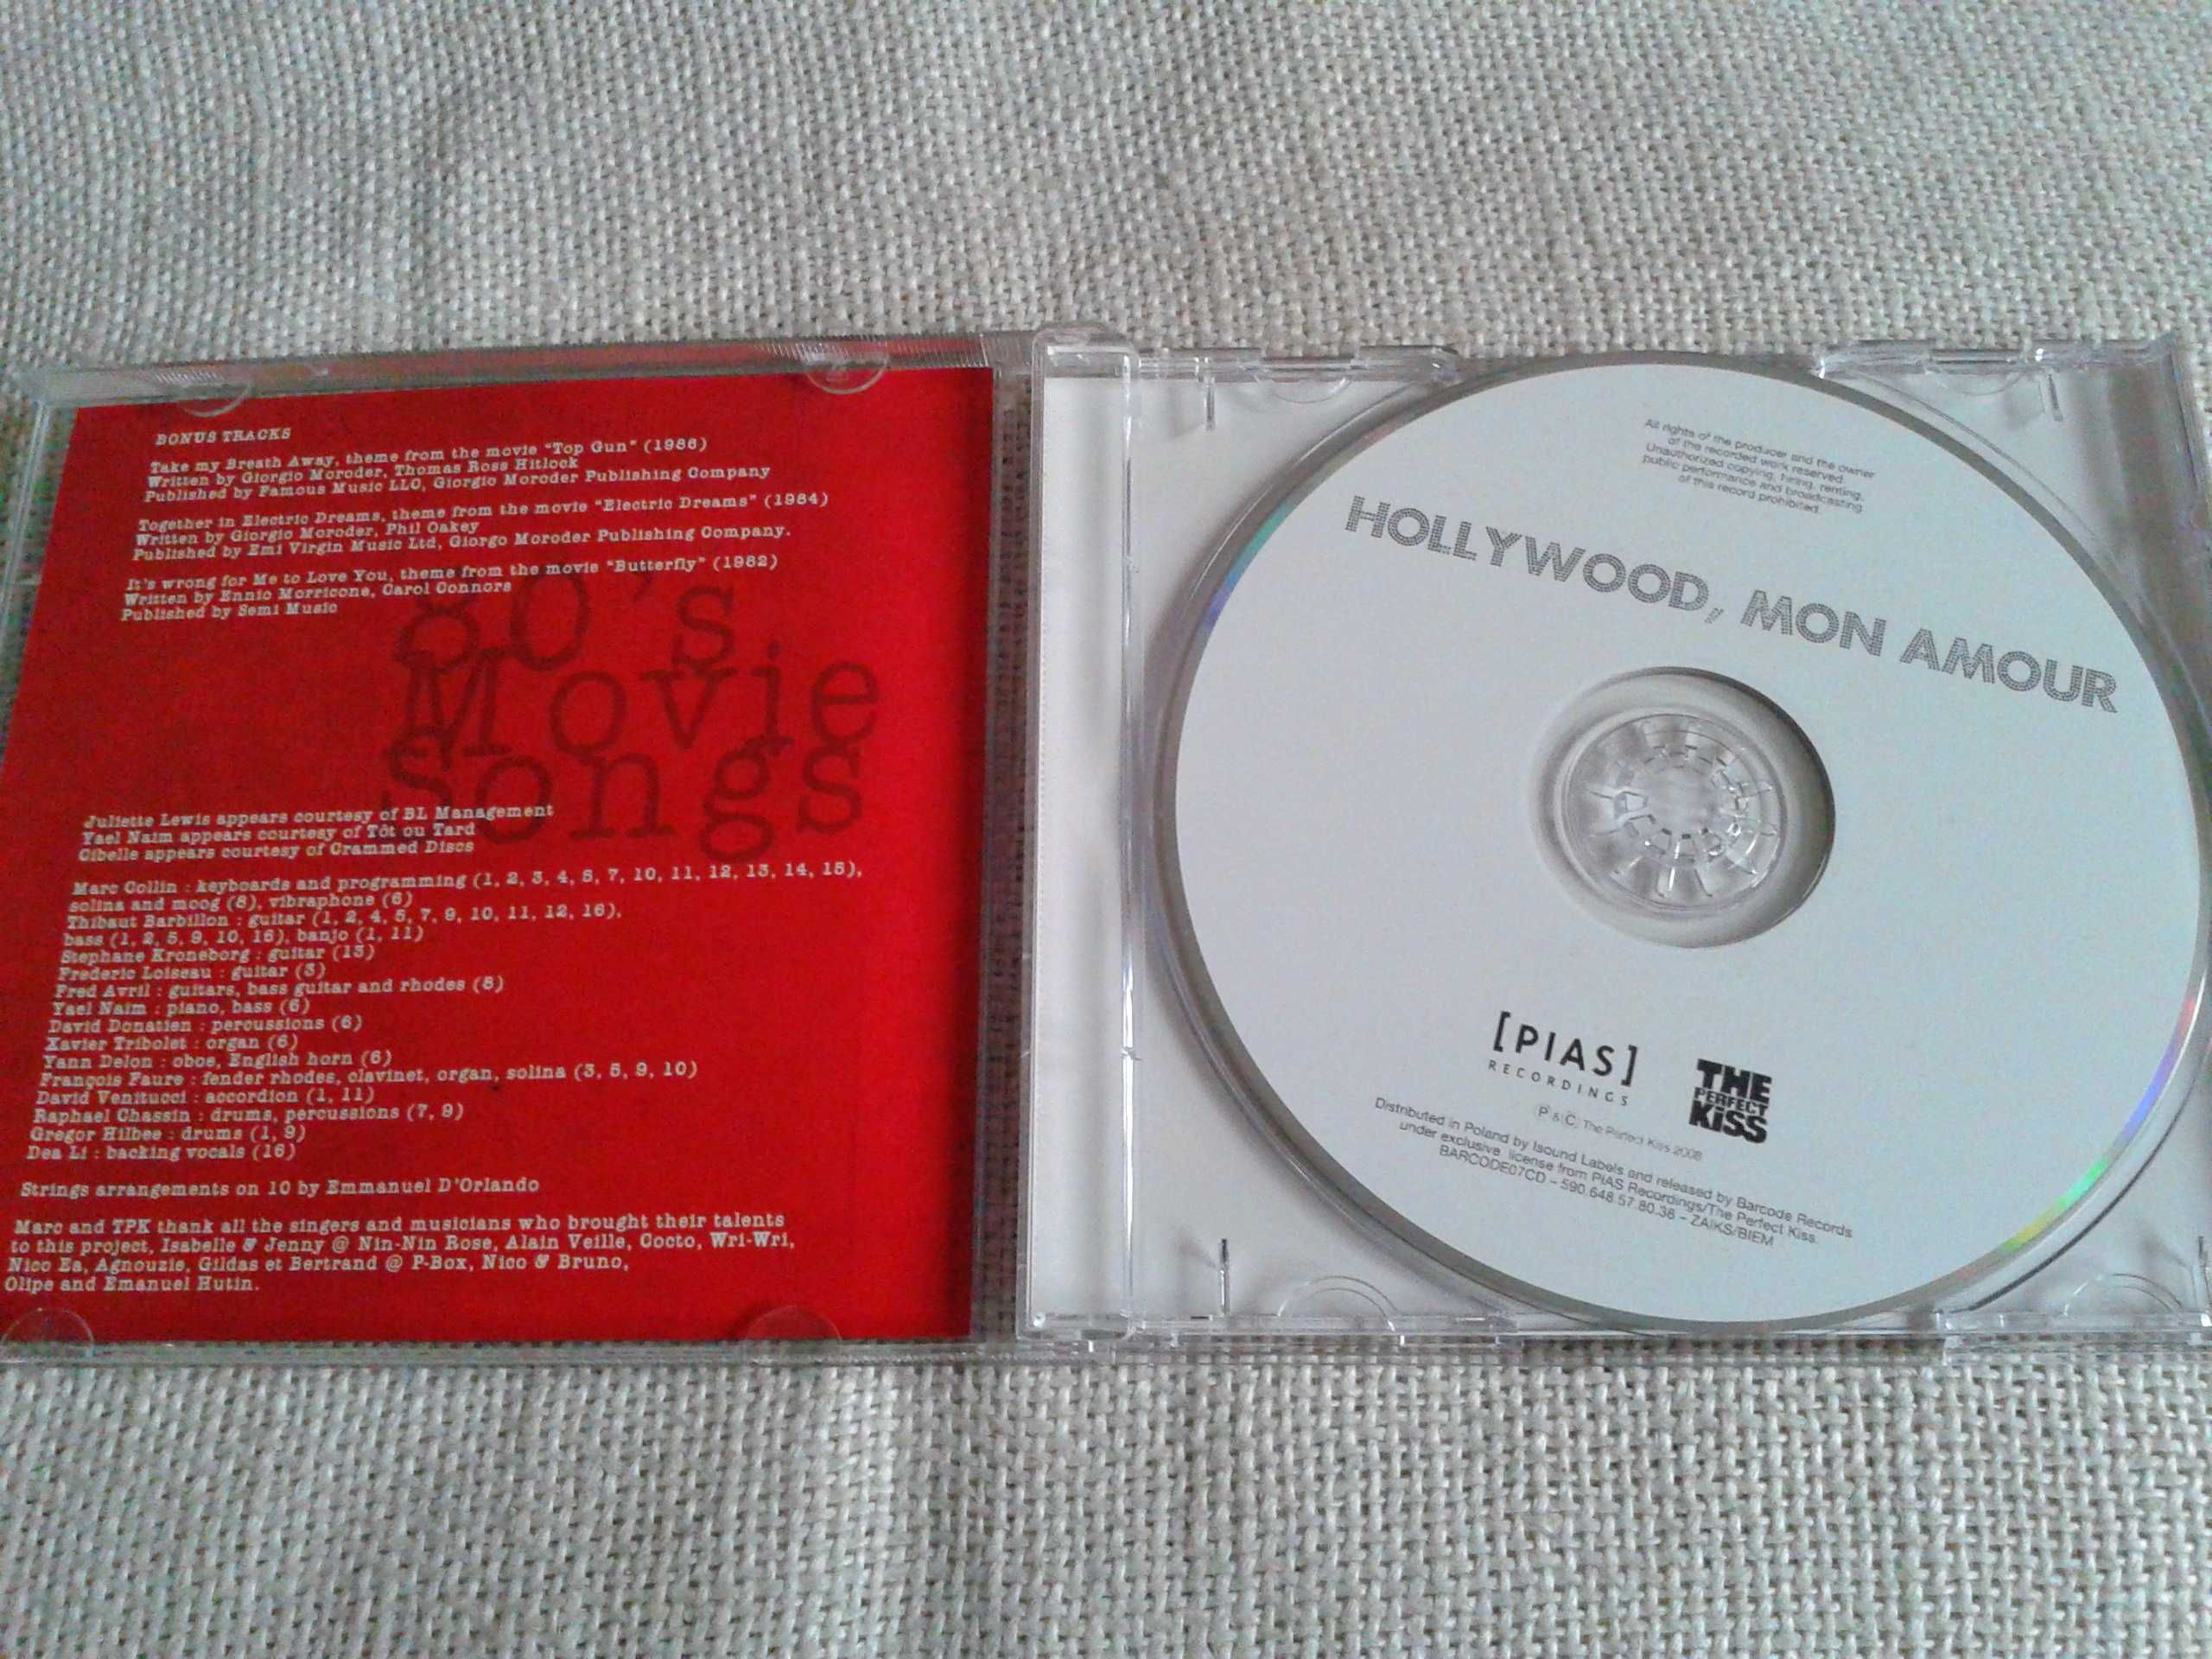 Hollywood Mon Amour  CD